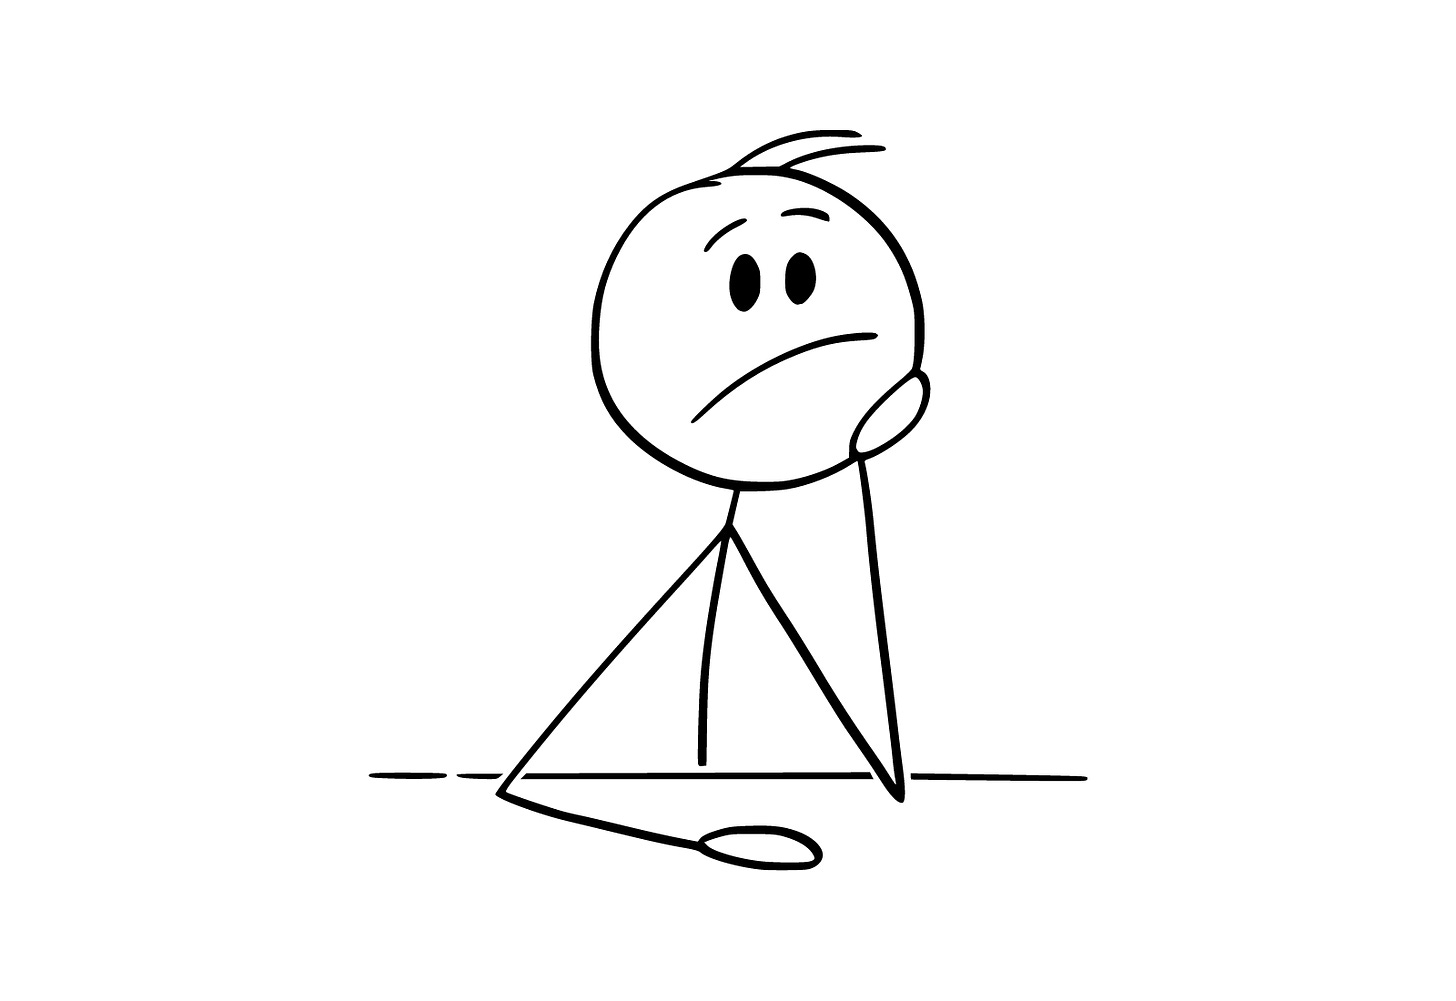 Image shows a stick figure looking contemplative.